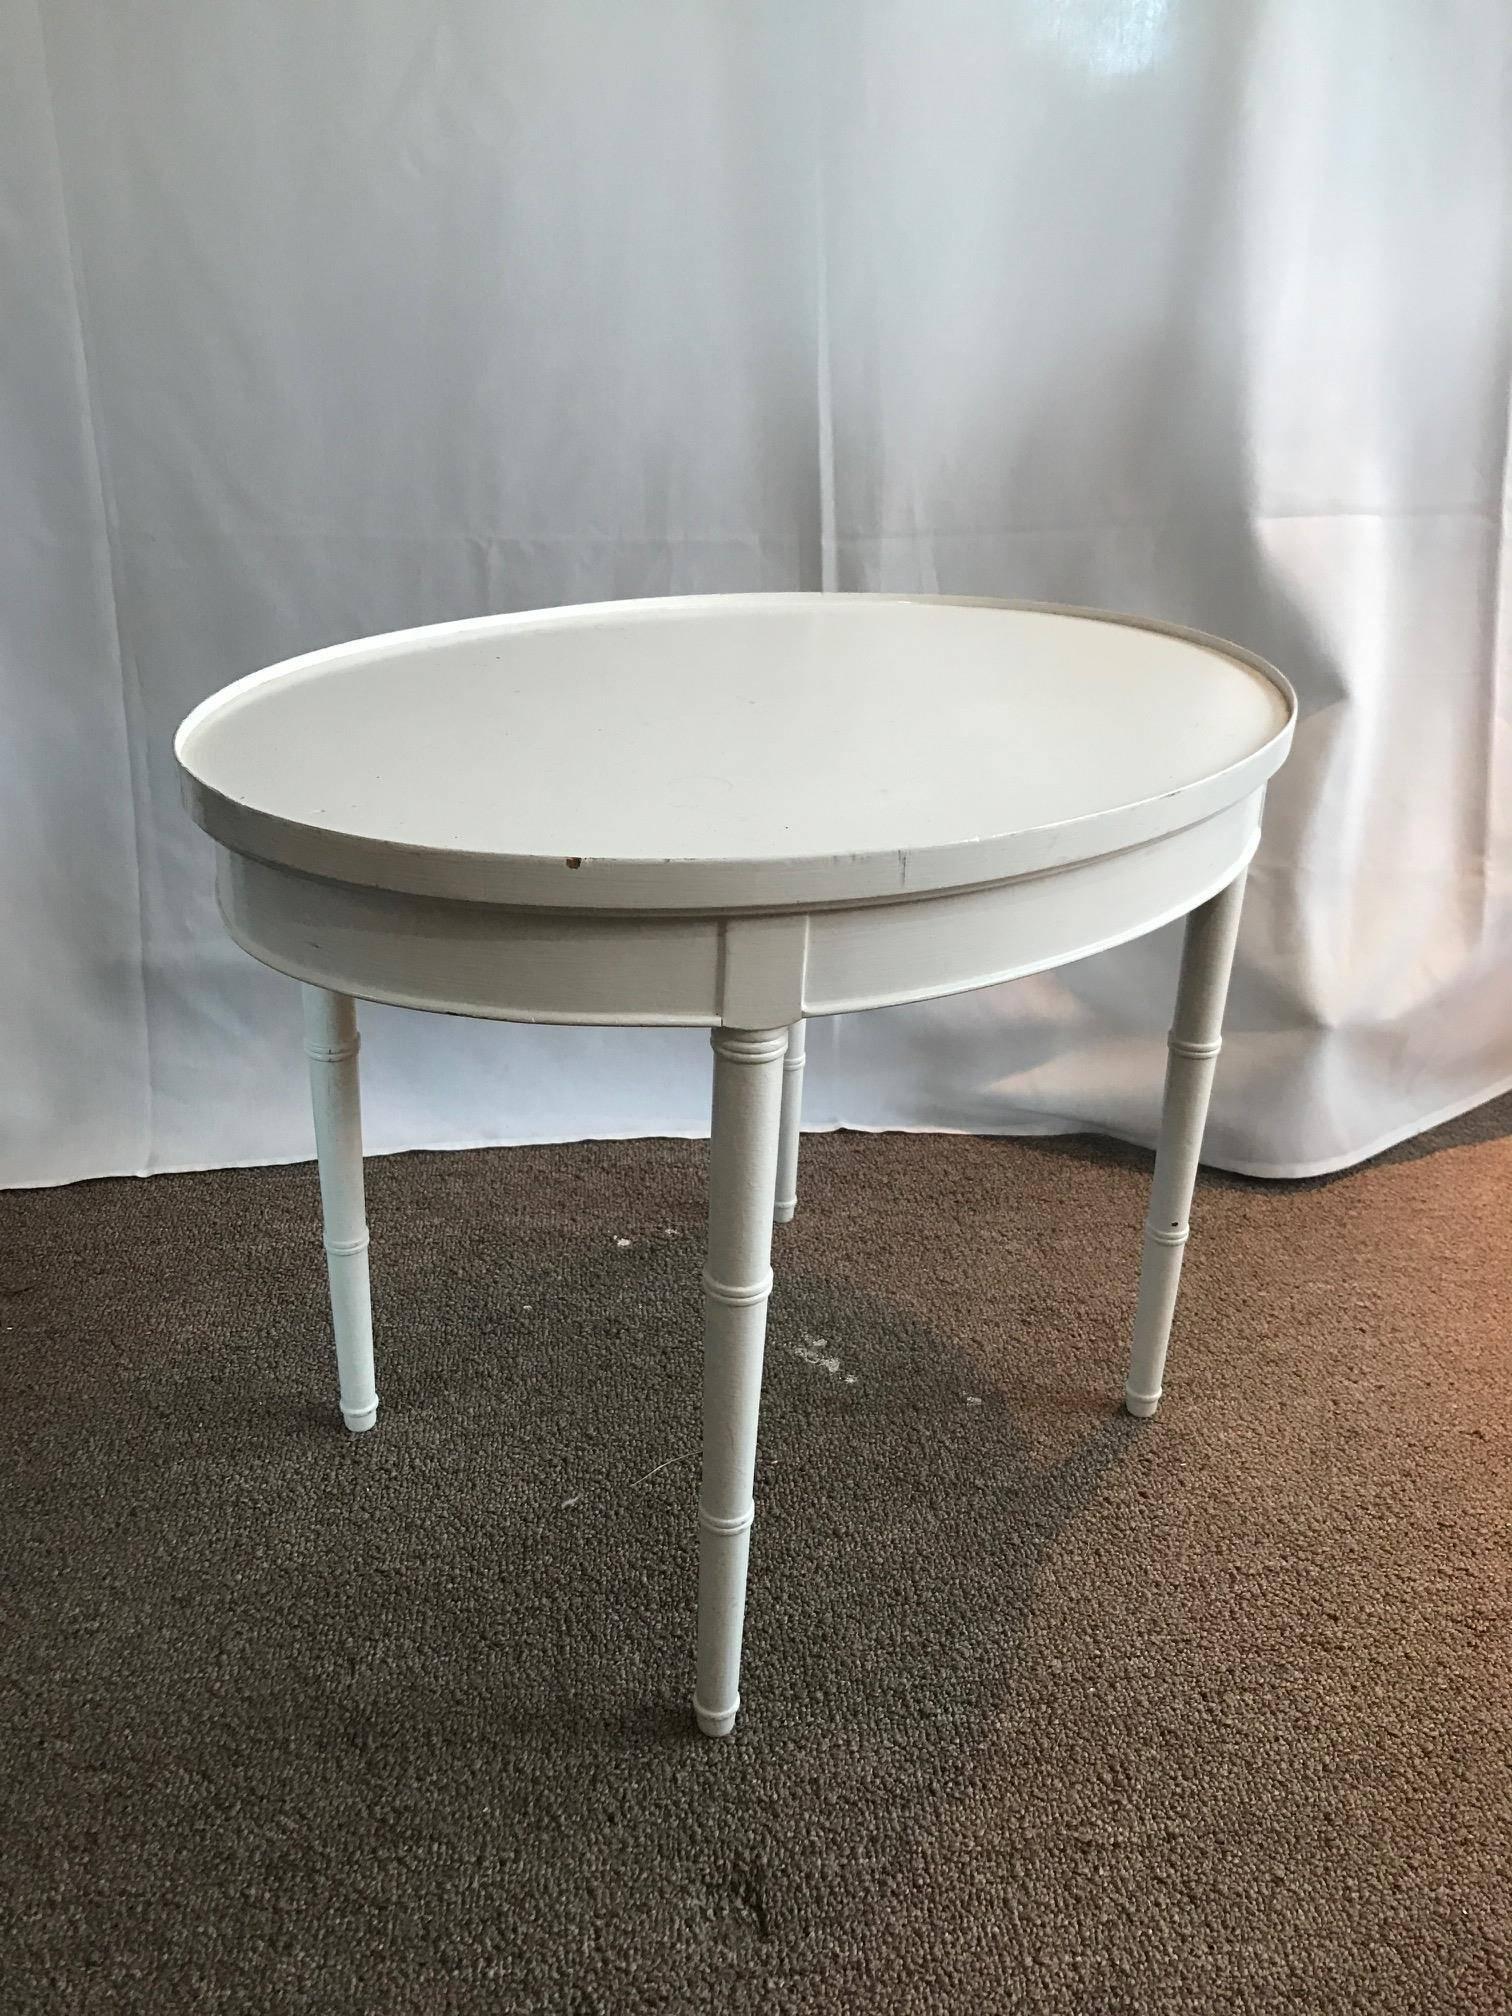 Maison Jansen style pretty as a picture petite white wooden side/coffee table. By the beach or the French countryside - this piece can fit in anywhere! A great side table or coffee table. Petite size and fabulous Louis XVI style.